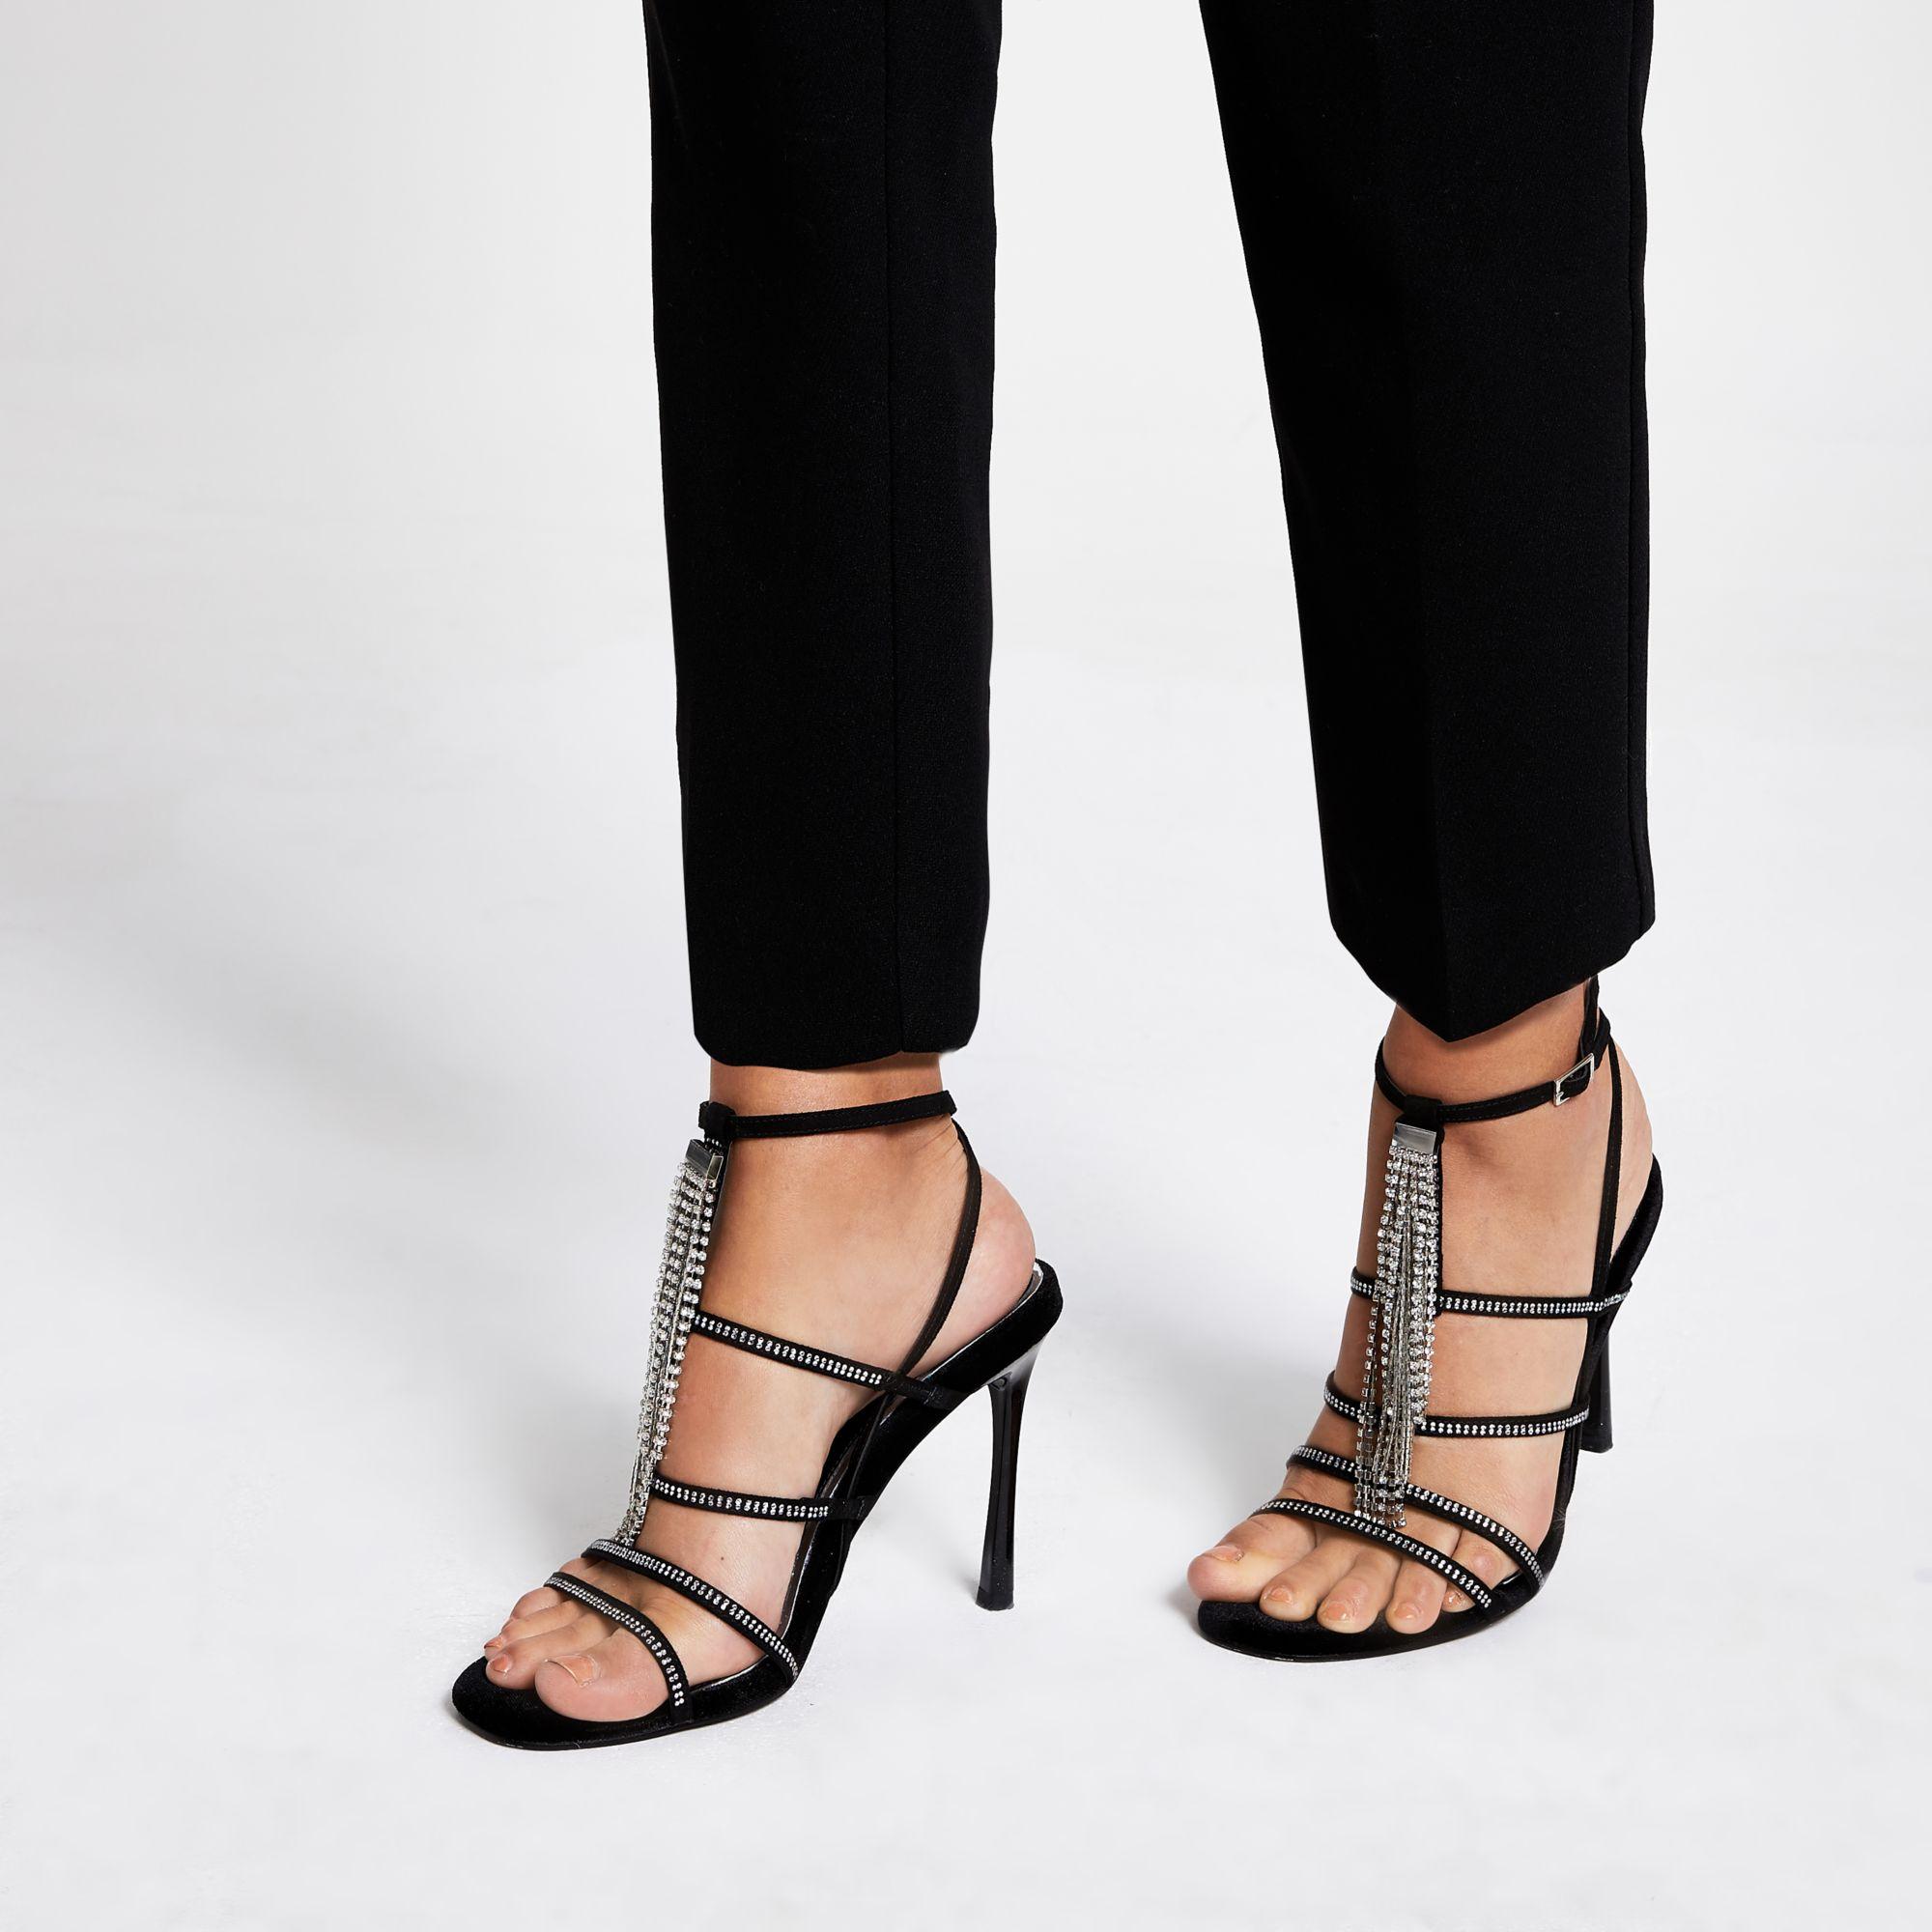 River Island Suede Diamante Strappy Heeled Sandal in Black - Lyst